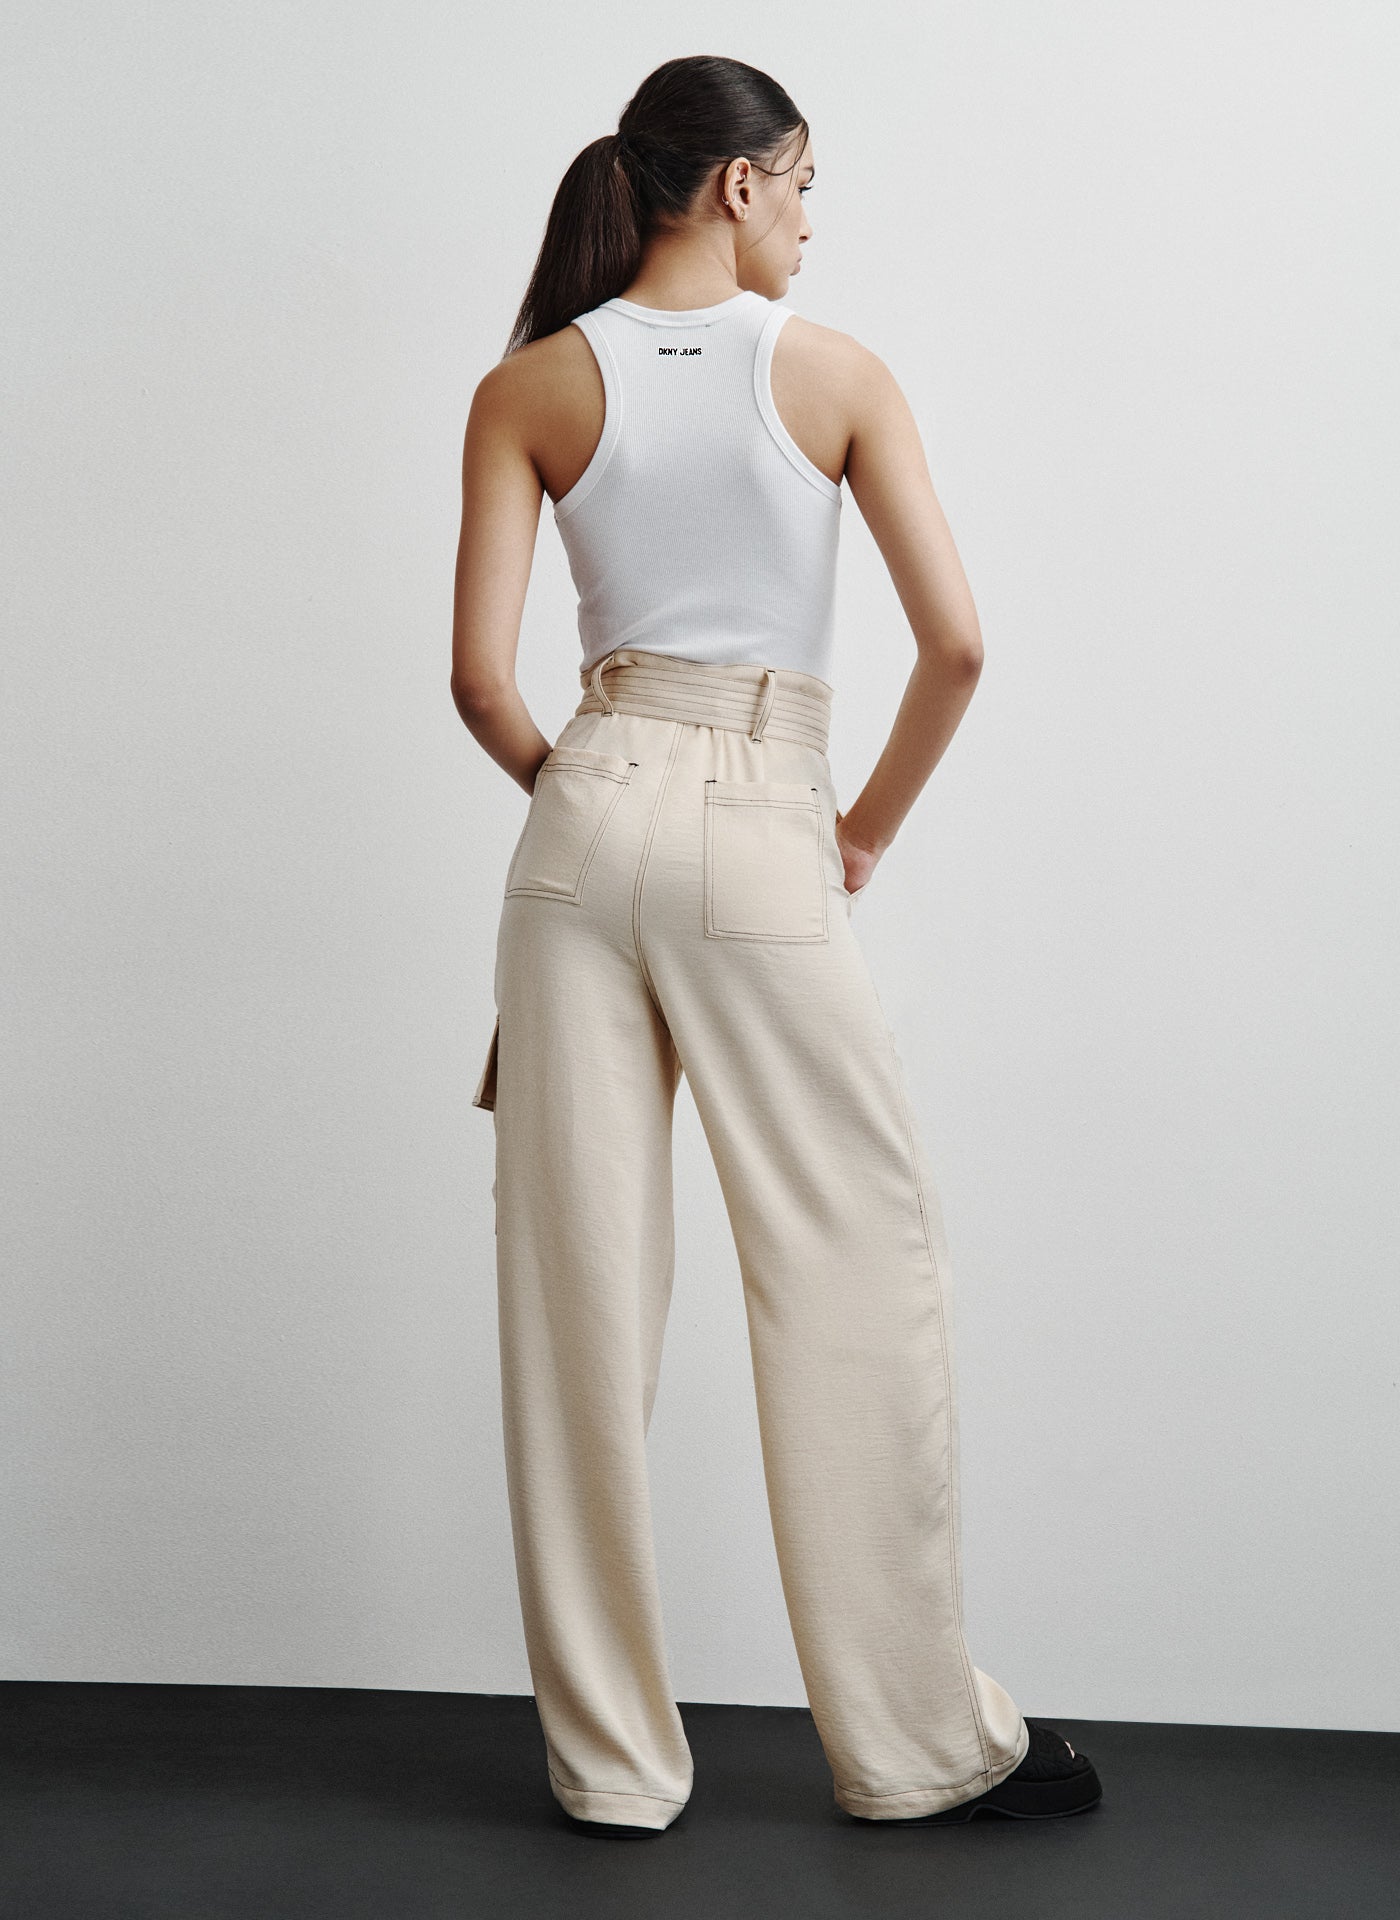 High Waisted Contrast Stitch Cargo Jogger Jeans